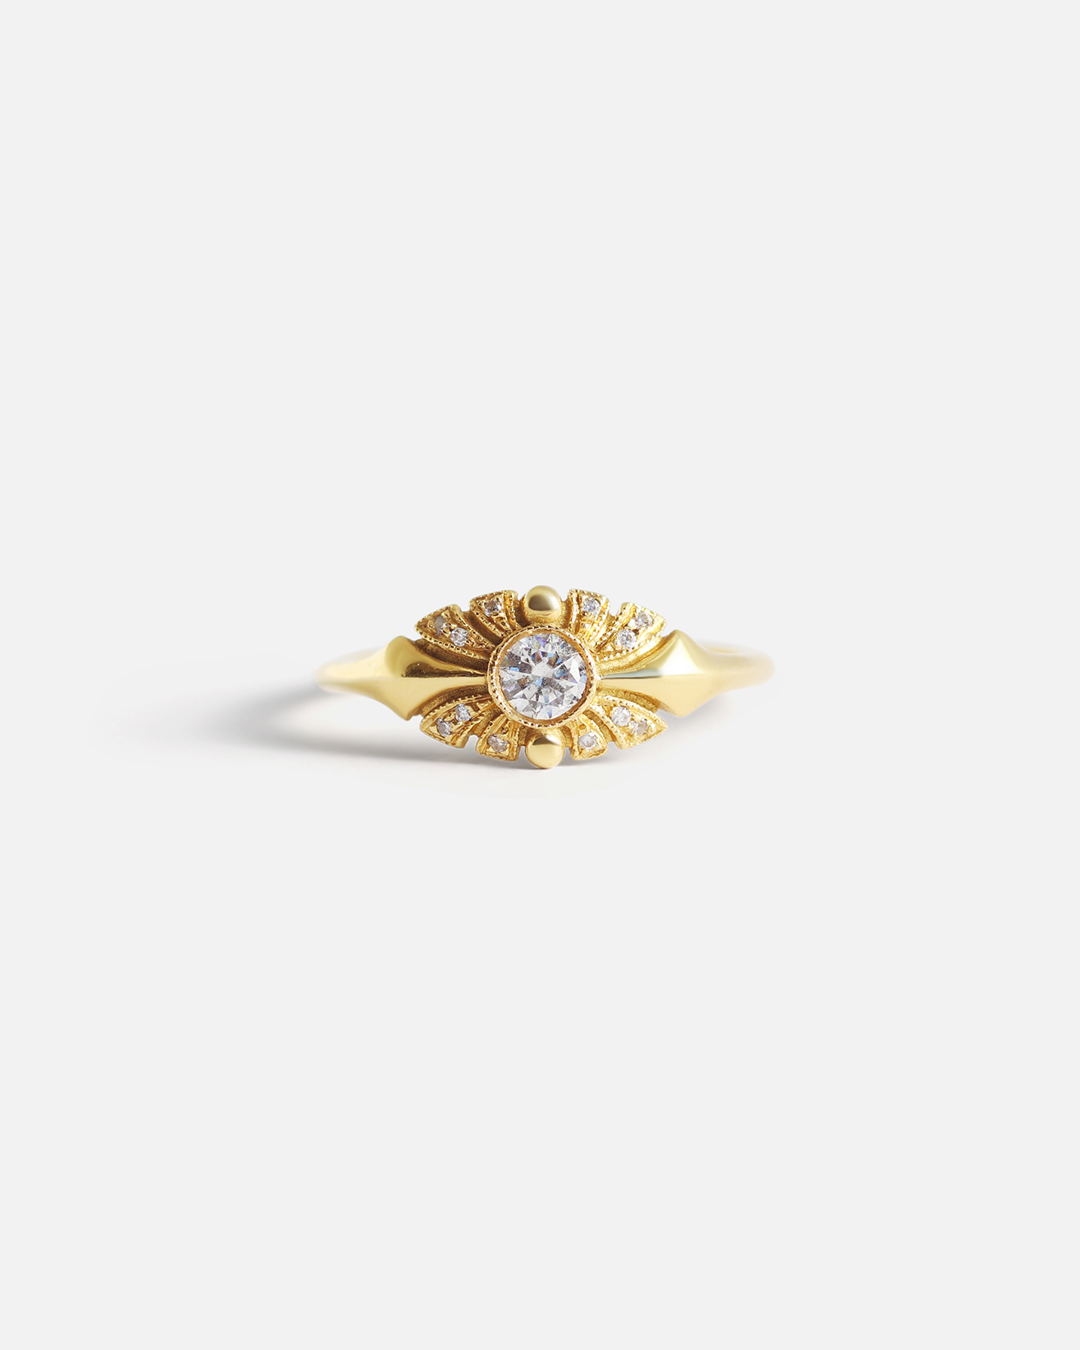 Sunrise Ring / White Diamonds By Katrina La Penne in Engagement Rings Category